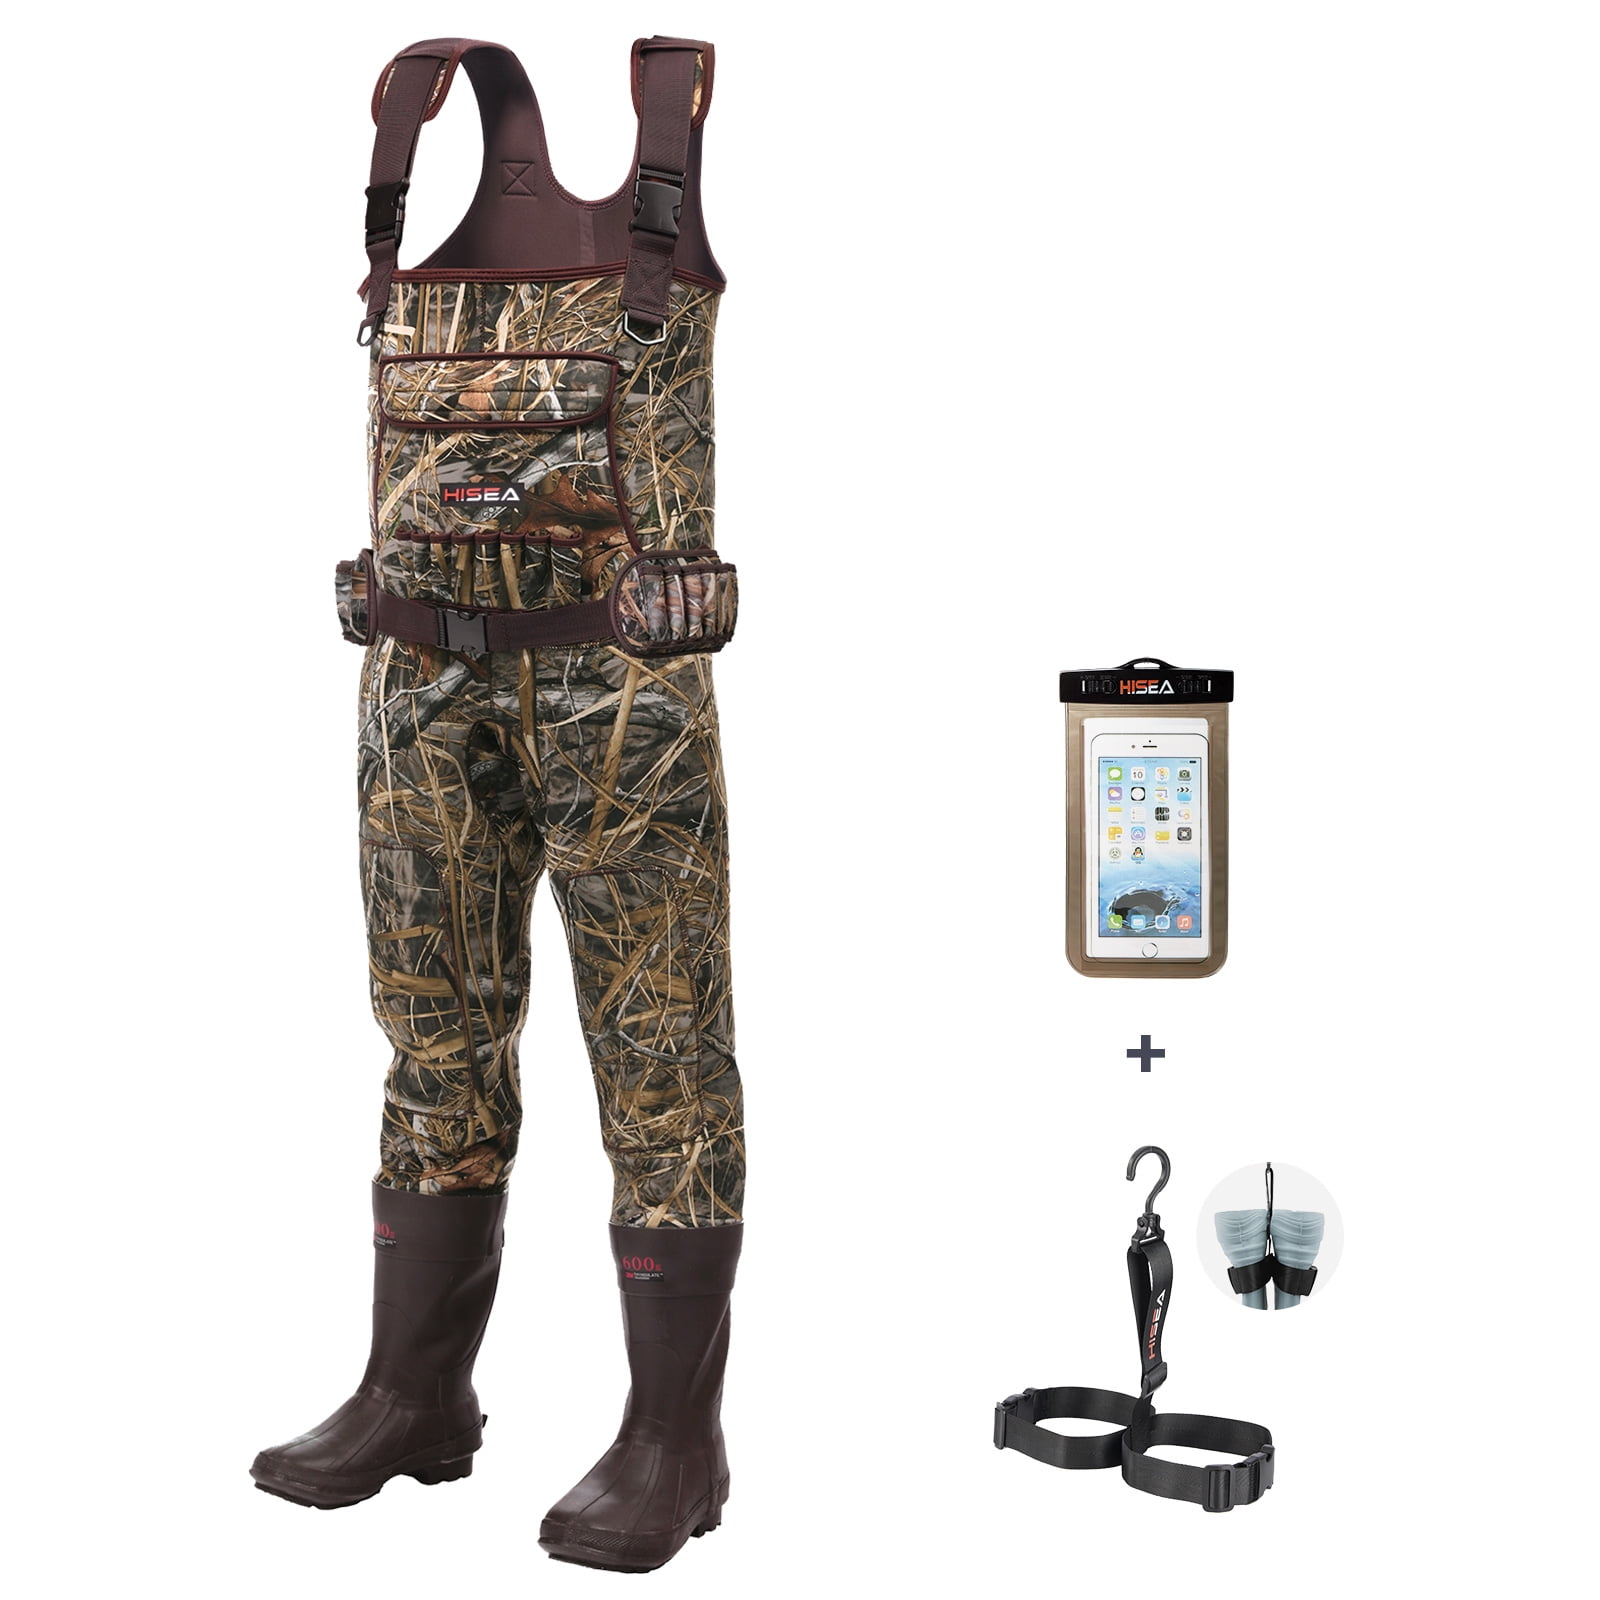 HISEA Chest Waders Neoprene Duck Hunting Waders for Men with Boots Camo Fishing 